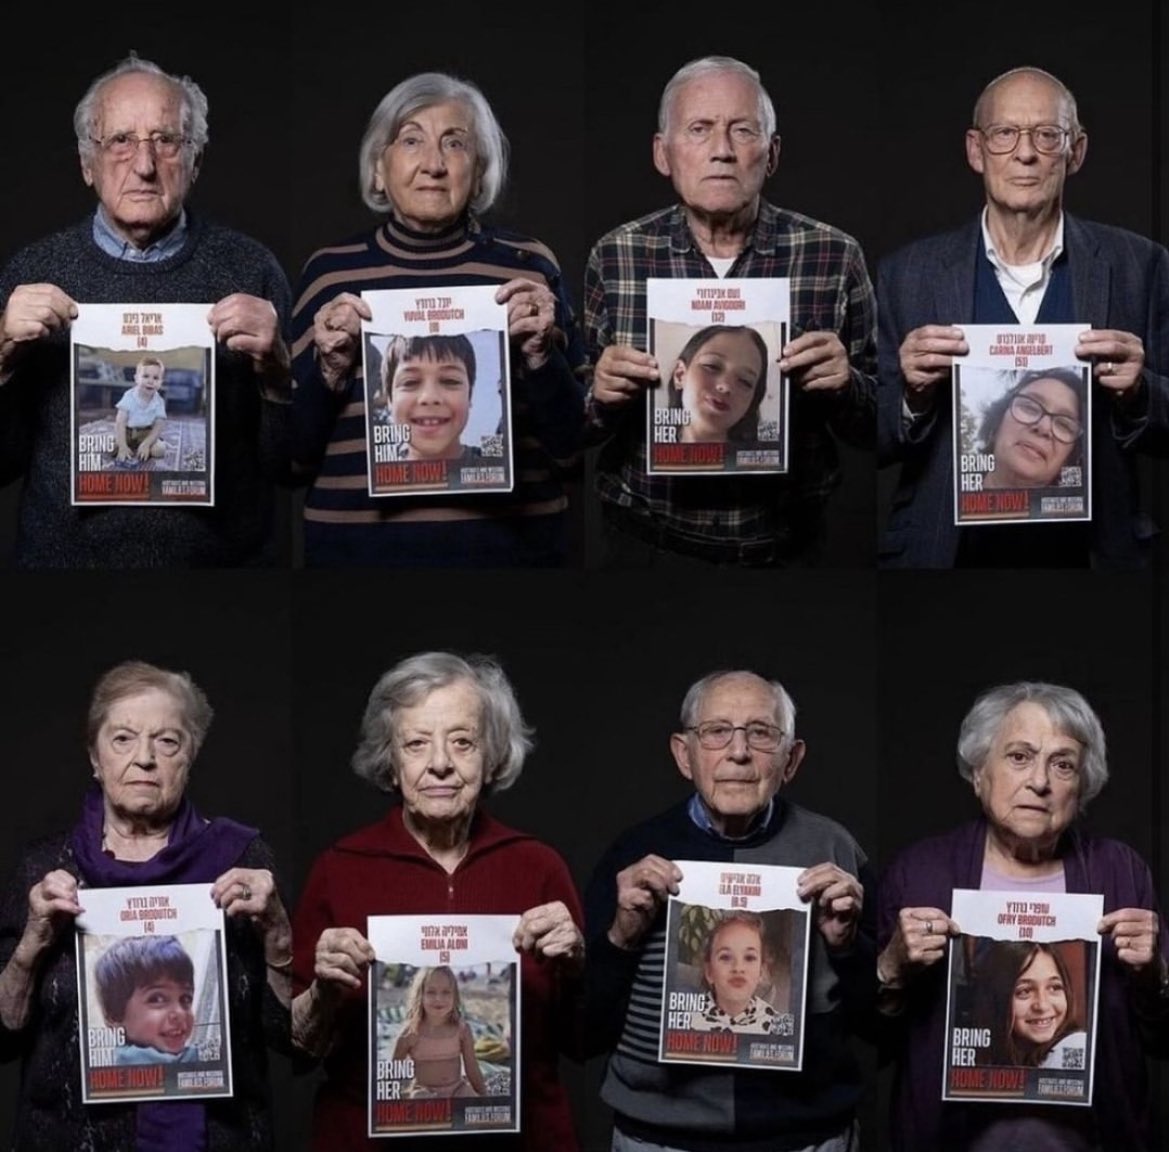 A powerful and heartbreaking image on the eve of Yom HaShoah.⁠ ⁠ Holocaust survivors hold posters of hostages and stand in solidarity with Israel. Rachel Levy says:⁠ ⁠ “As a Holocaust survivor, I never thought l'd see this kind of inhumanity again.” ⁠ #NeverAgainIsNow